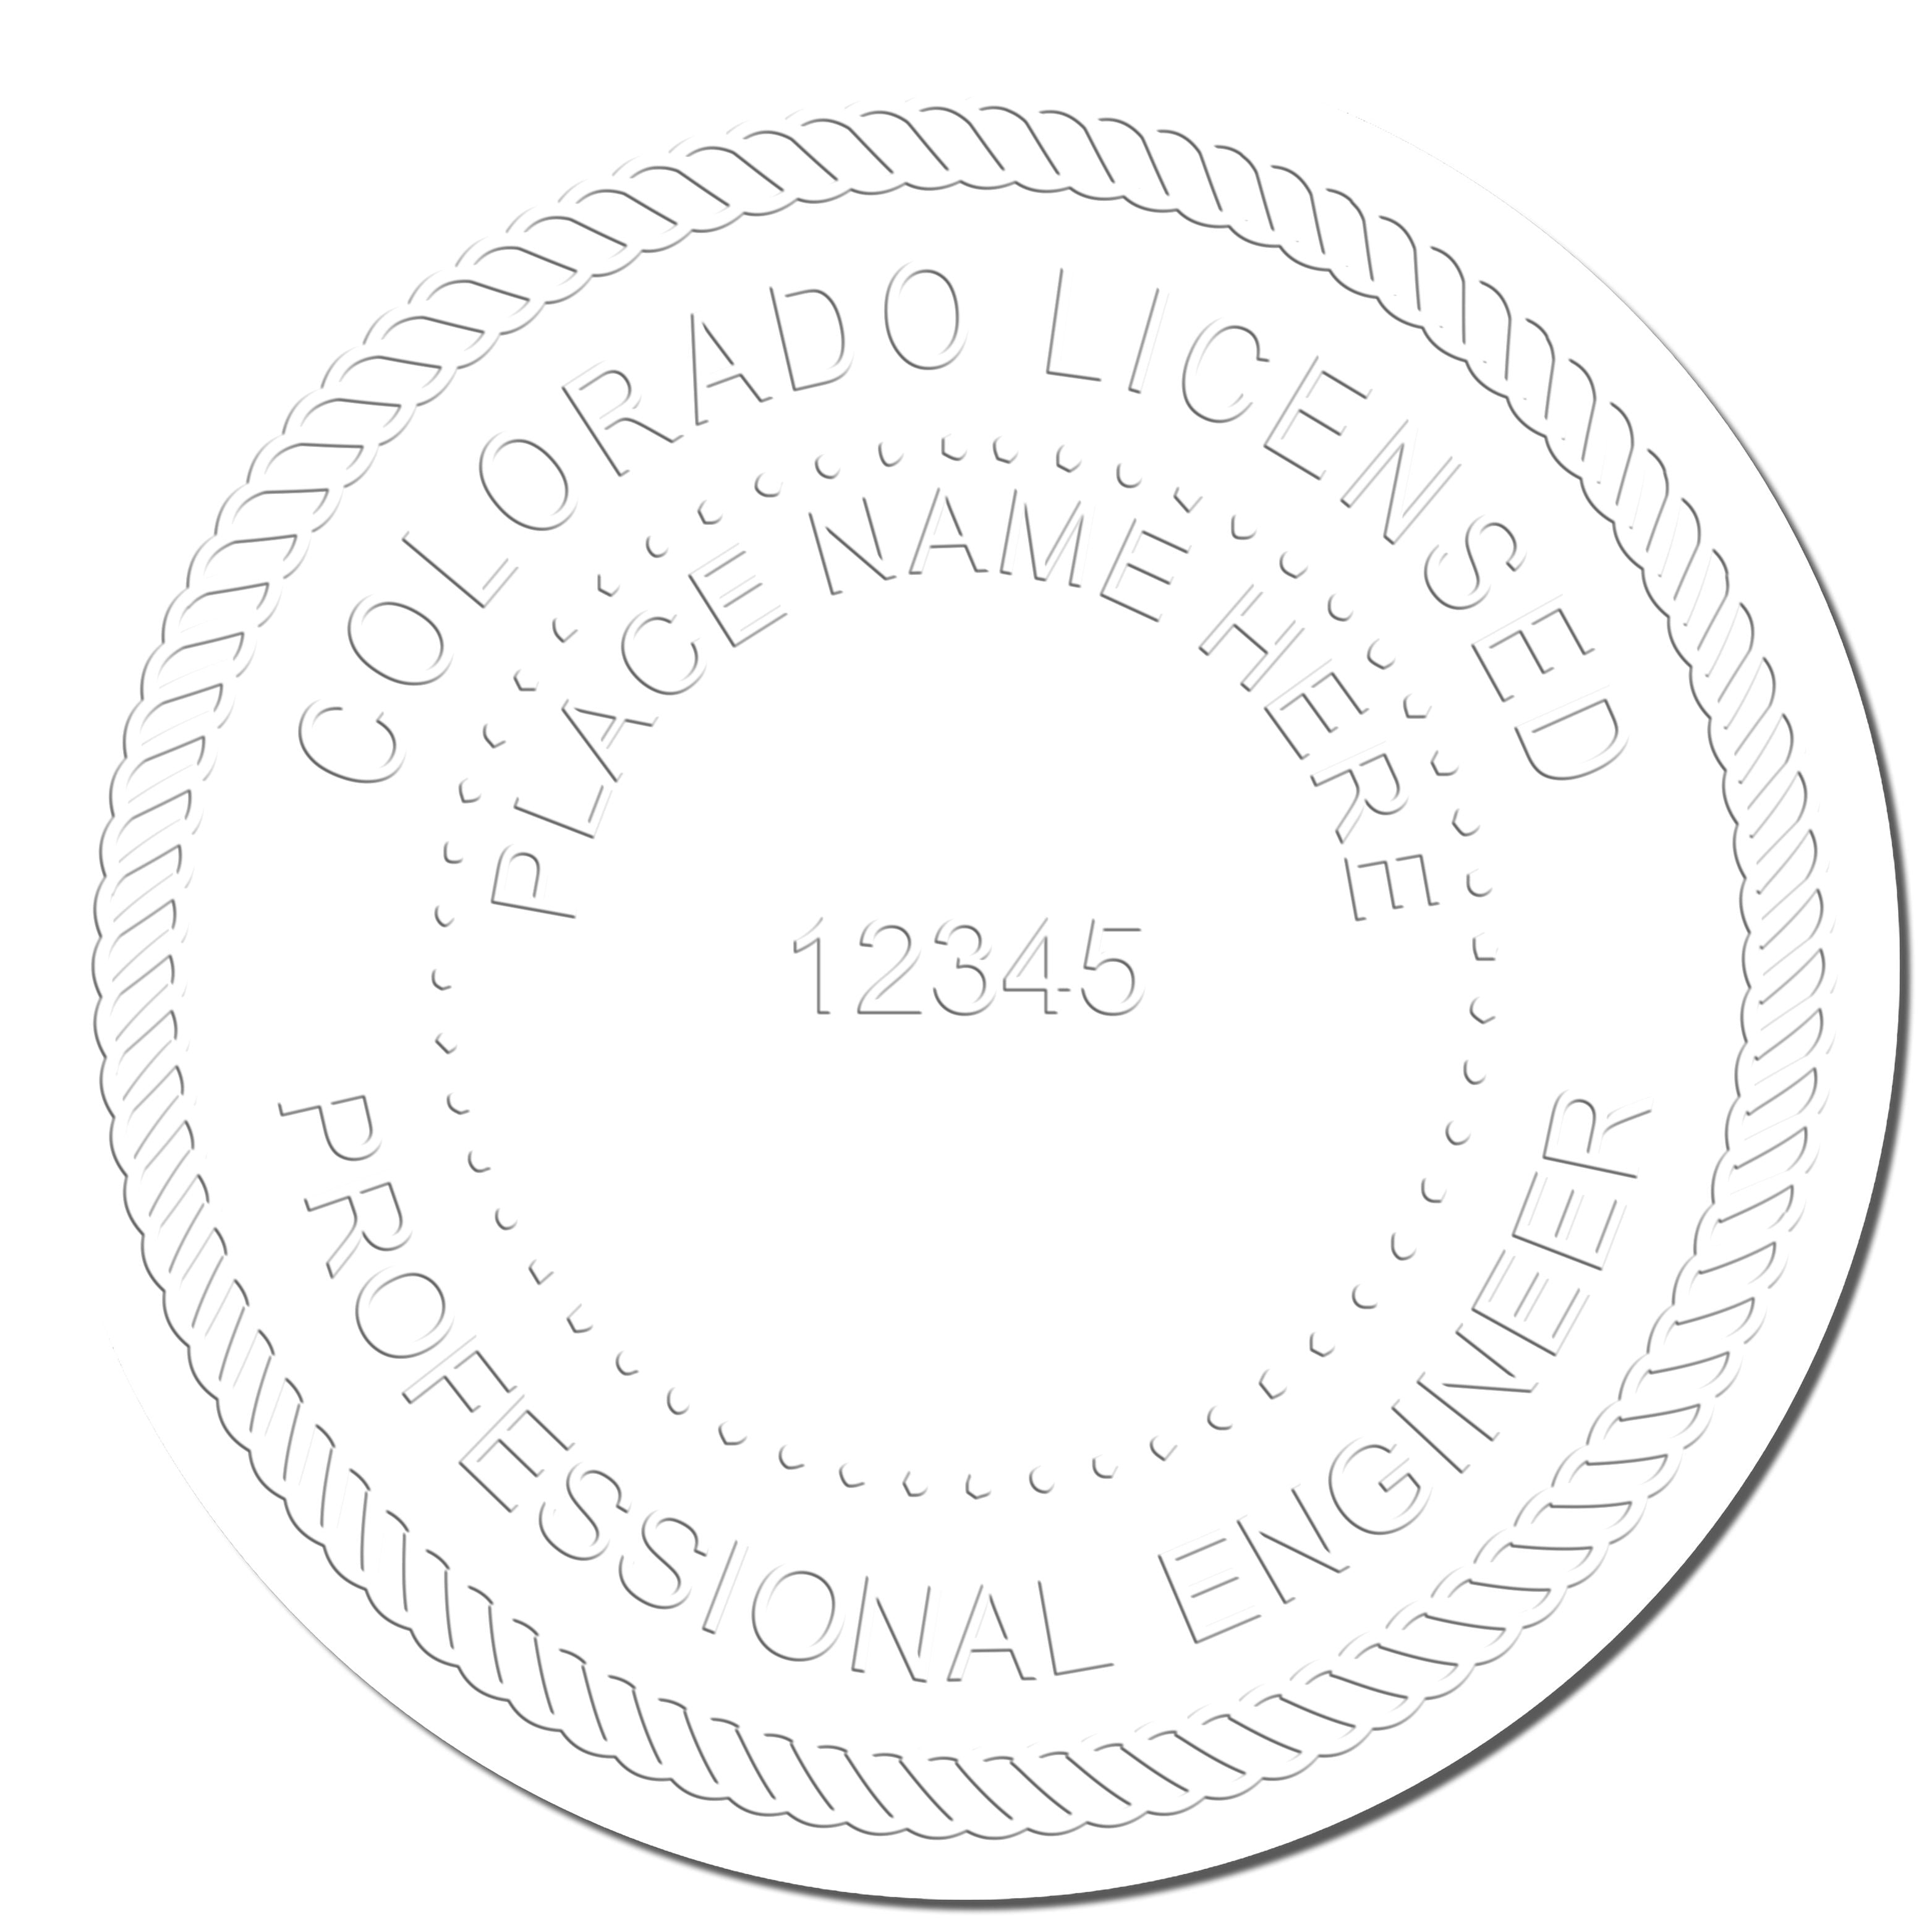 This paper is stamped with a sample imprint of the Heavy Duty Cast Iron Colorado Engineer Seal Embosser, signifying its quality and reliability.